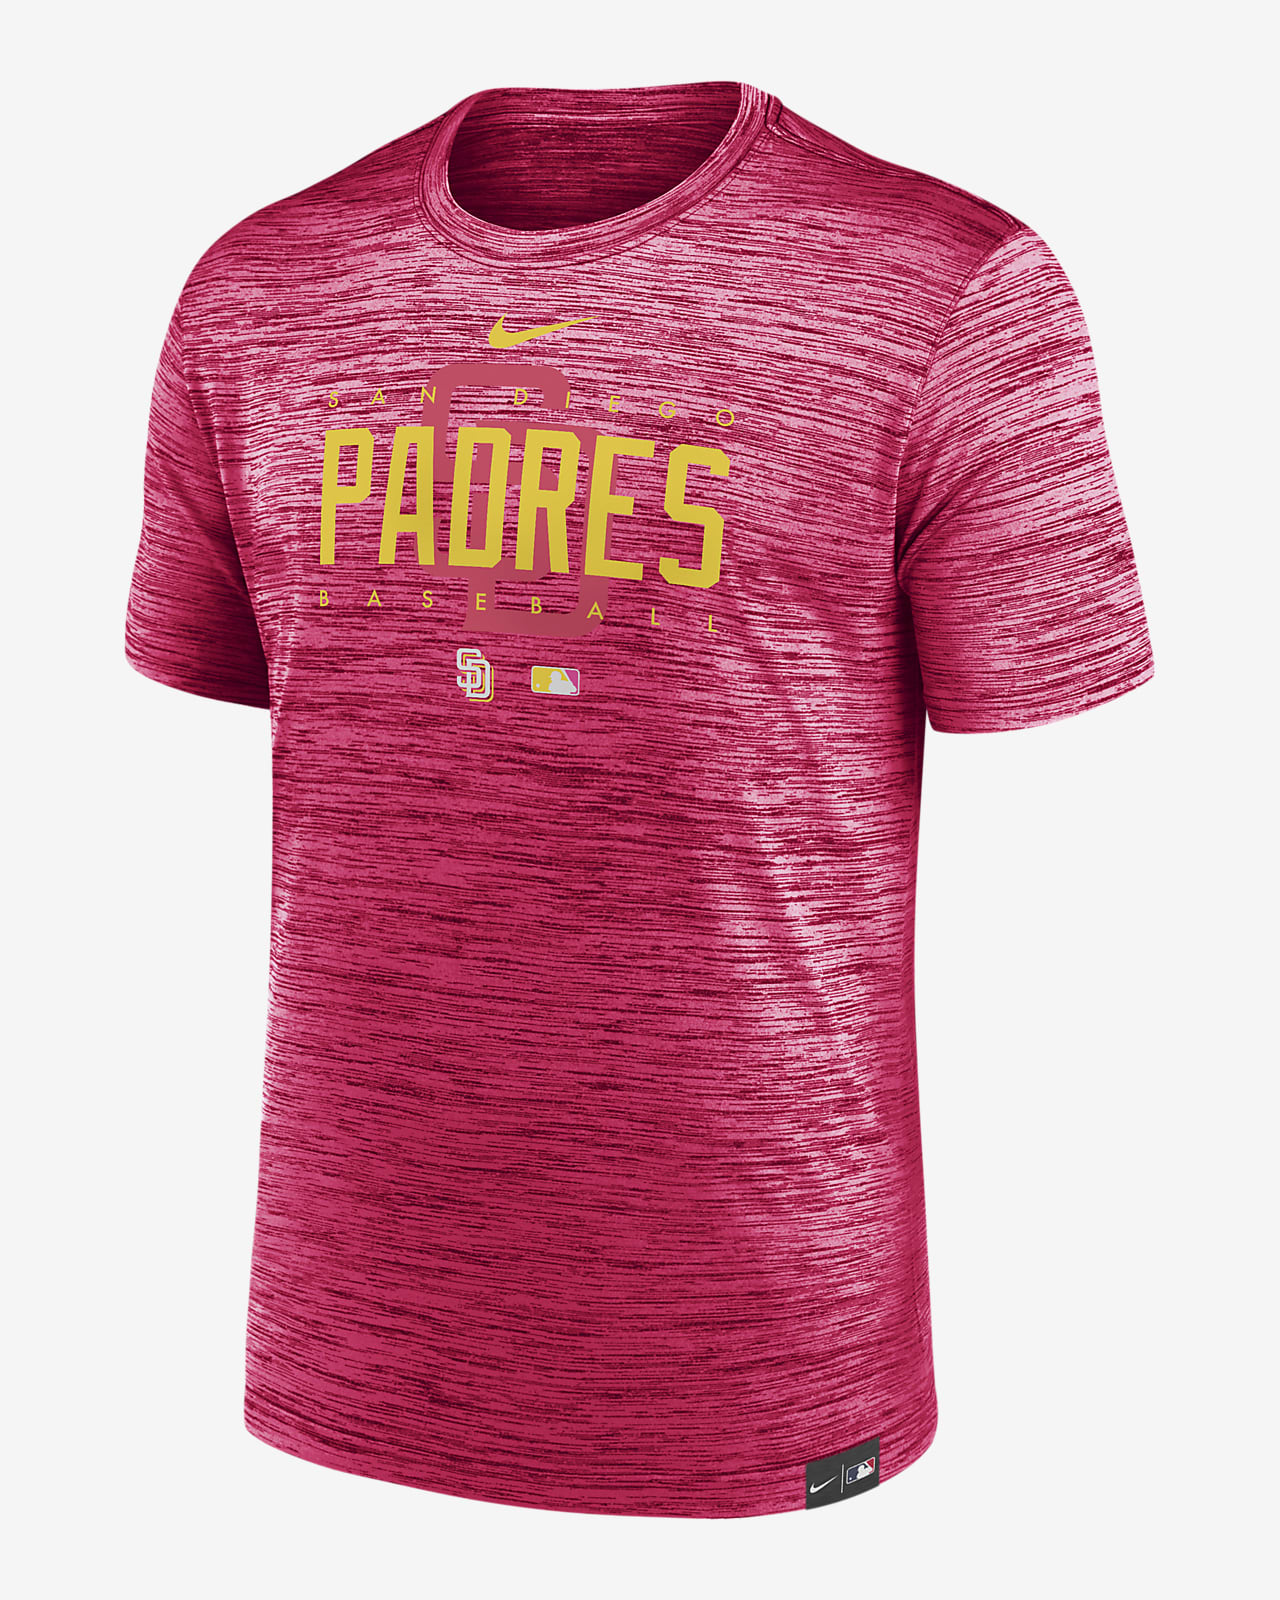 padres city connect shirts